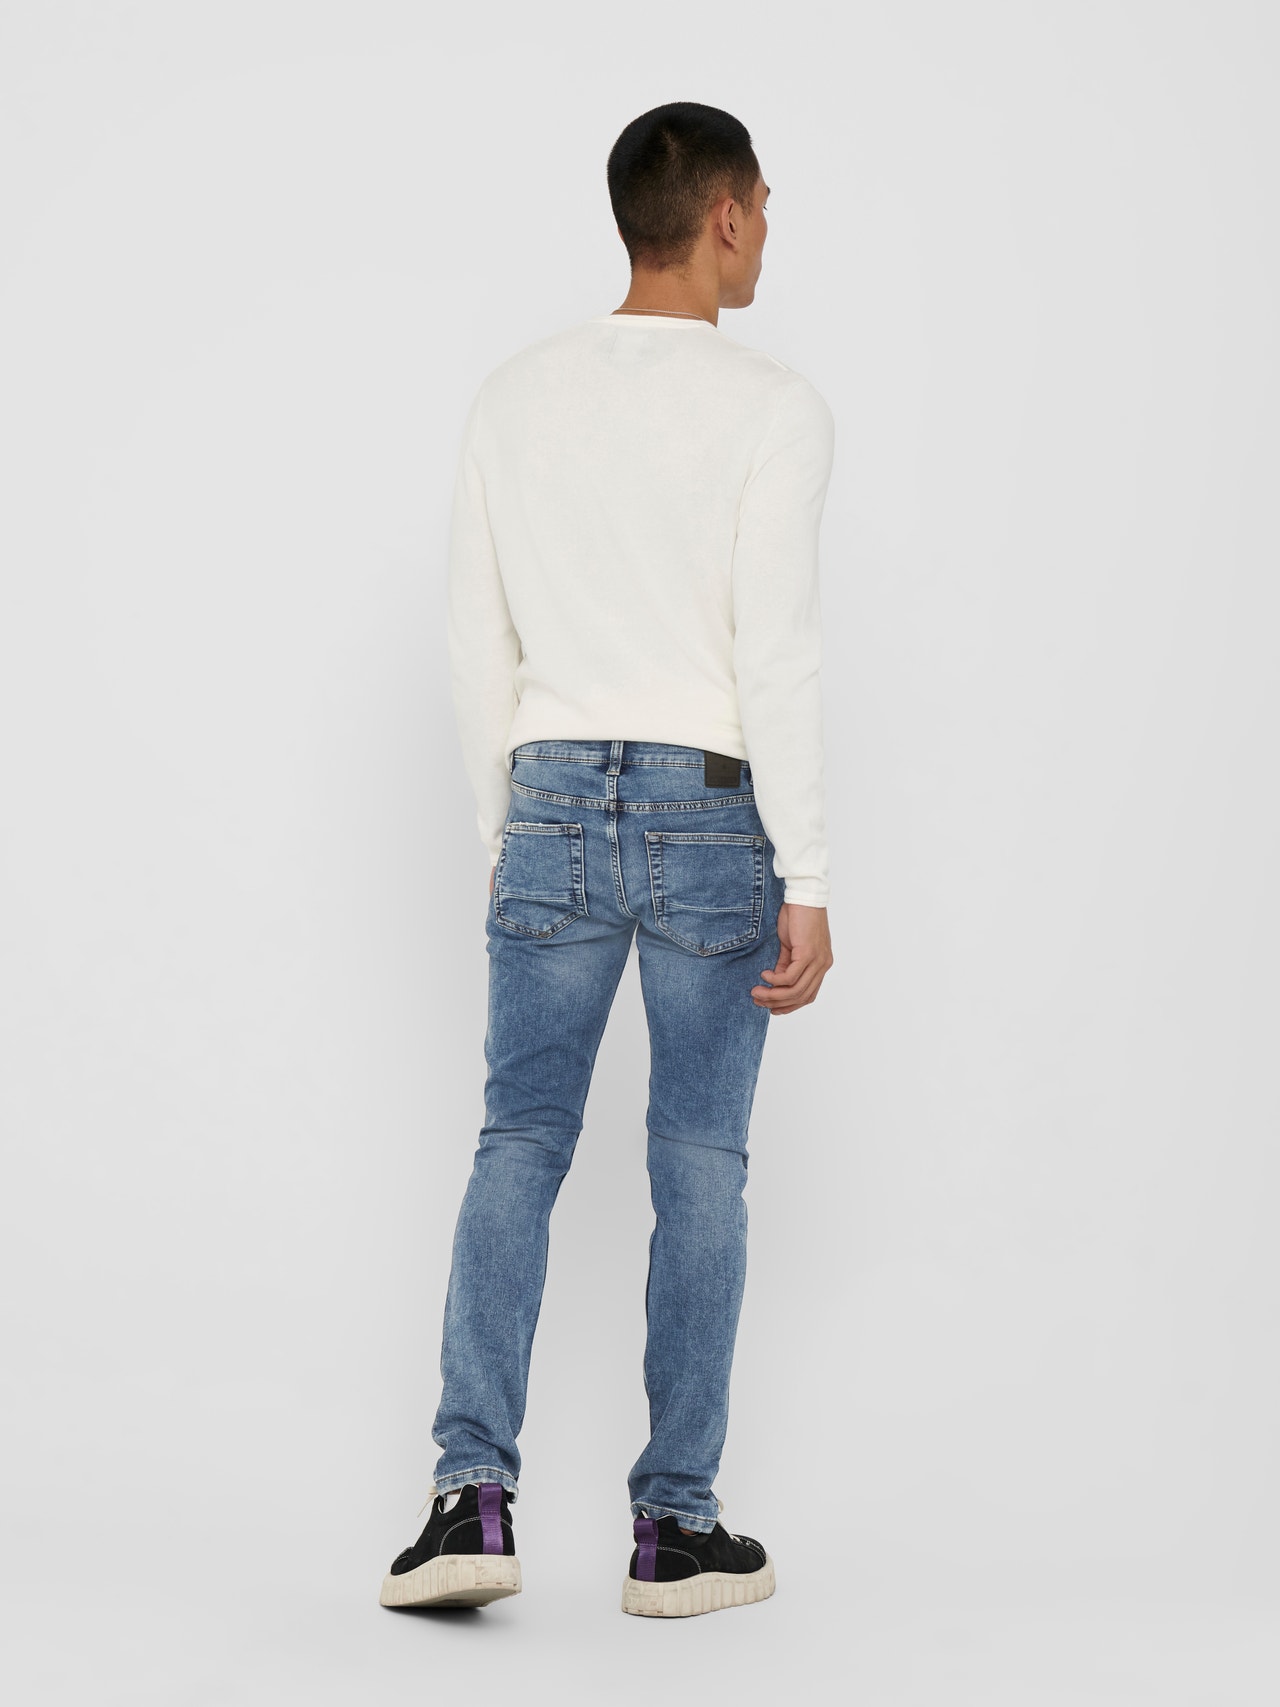 ONLY & SONS Slim Fit Niedrige Taille Jeans -Blue Denim - 22018653